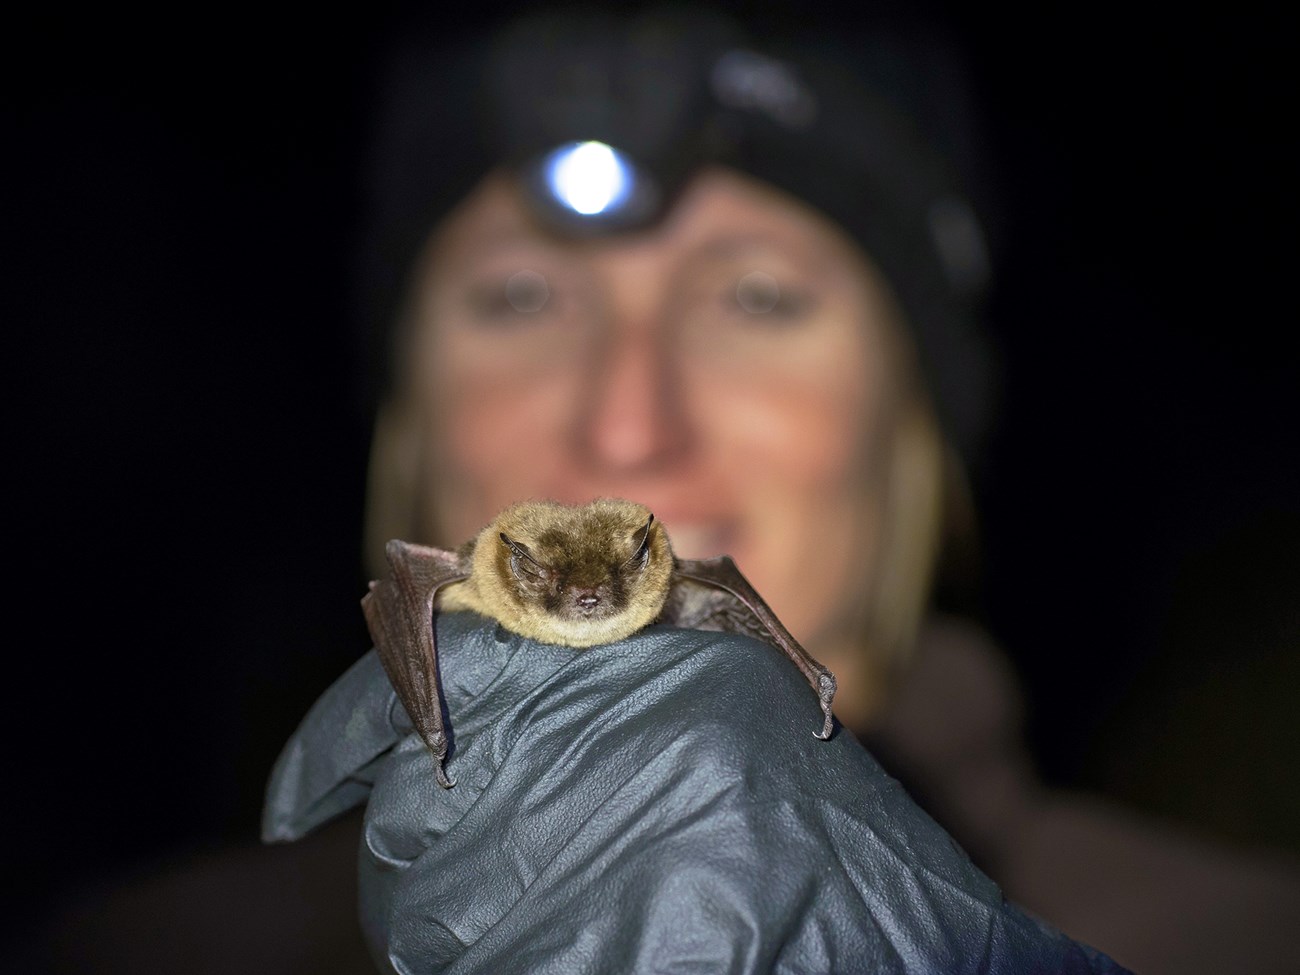 Person with a headlamp holding a small, furry, brown-colored bat out in front of them.